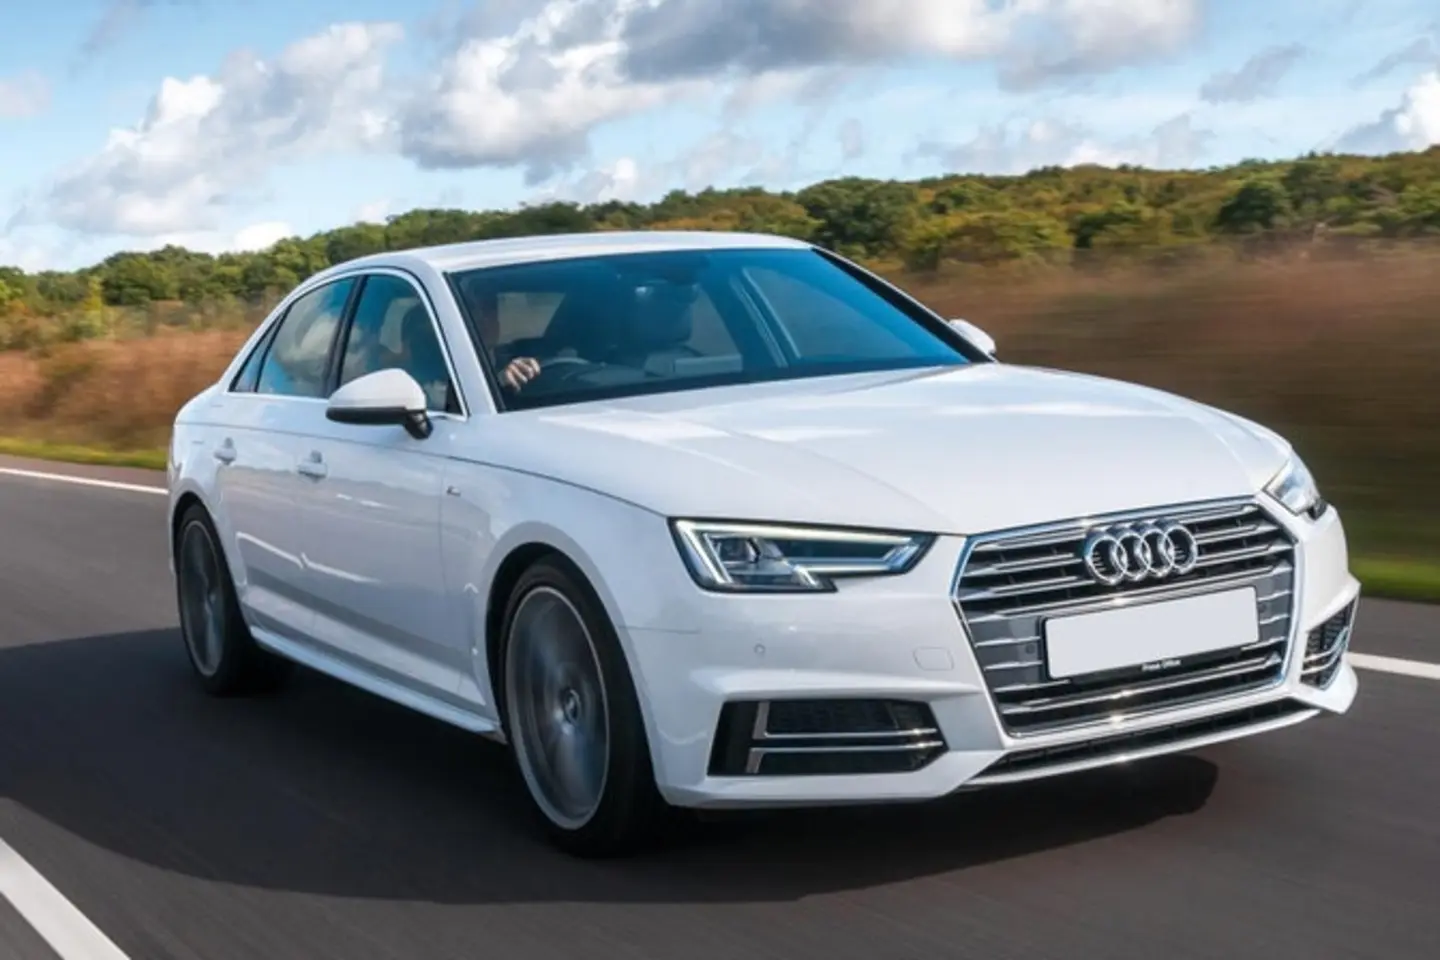 The exterior of a white Audi A4